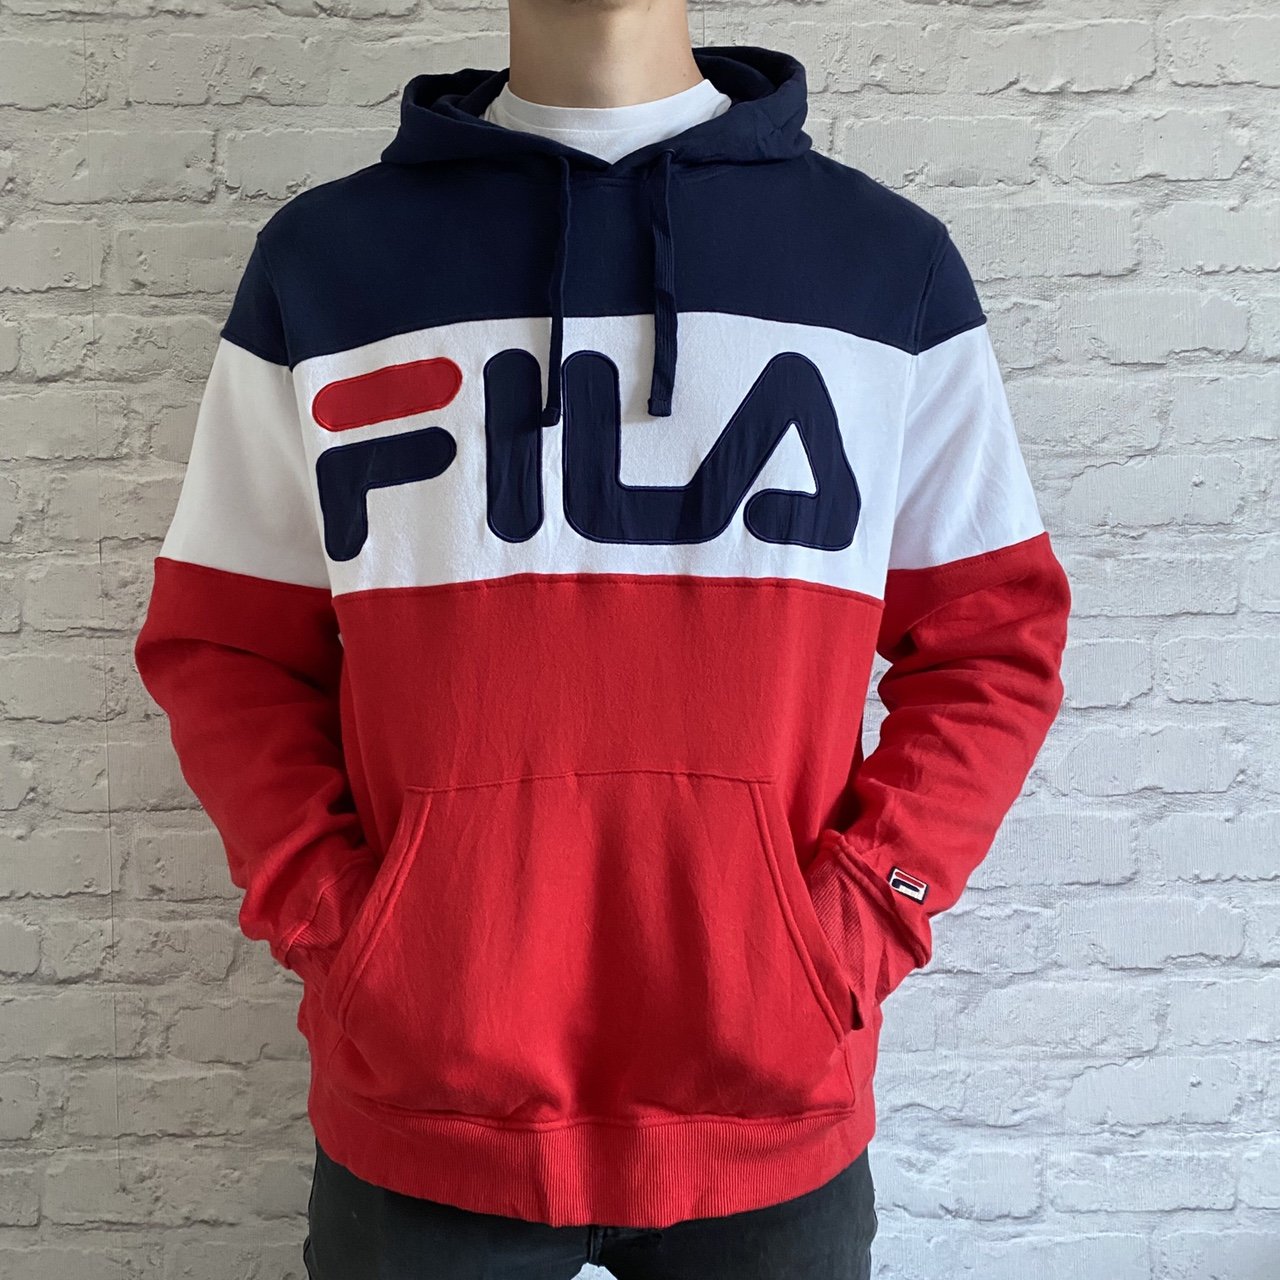 Fila Spellout Hoodie - Large - Vintique Clothing